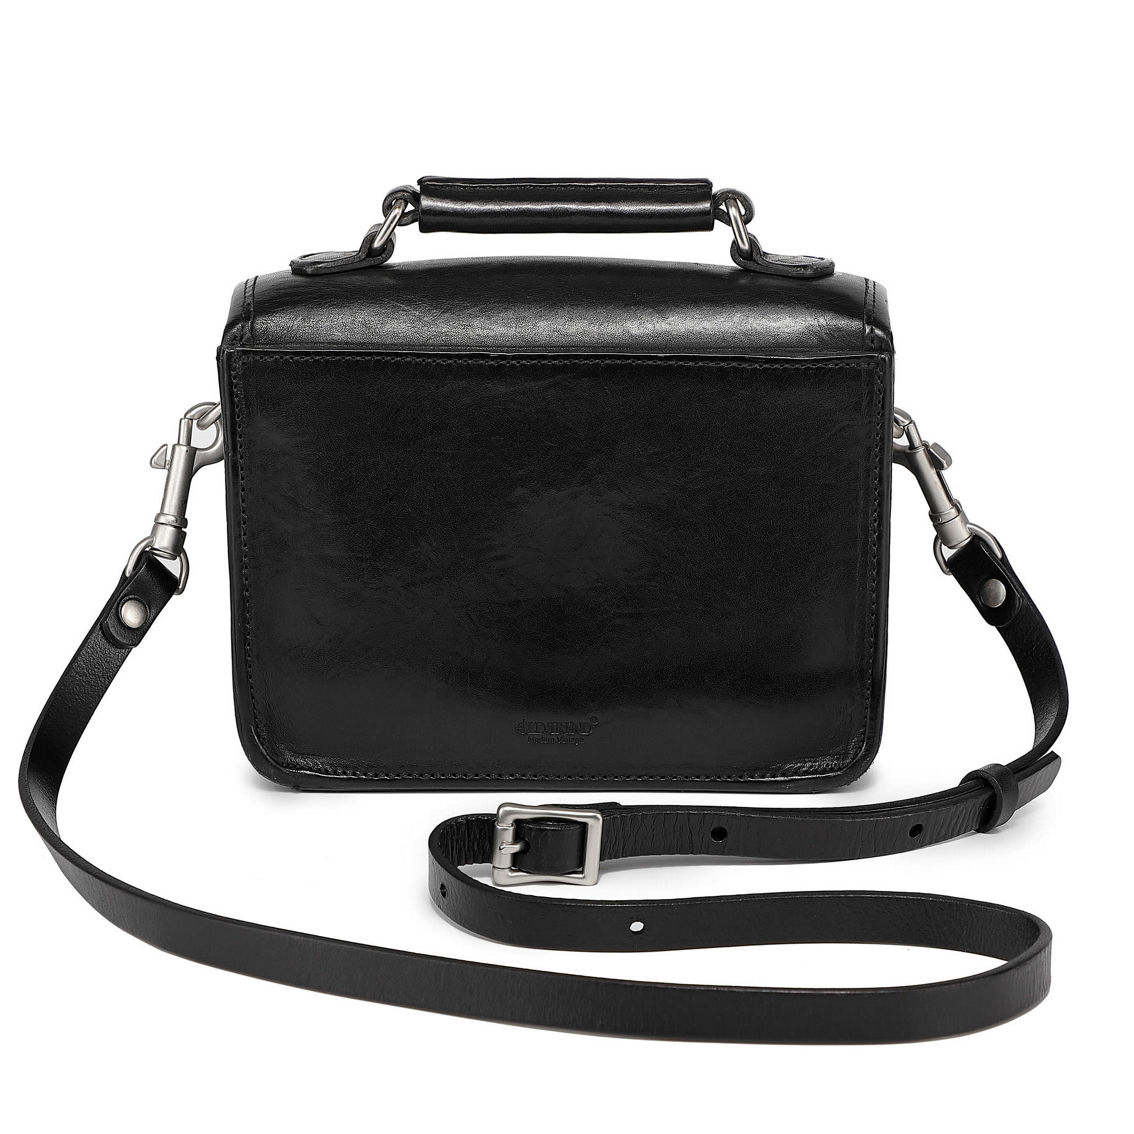 Old Trend Laurel Convertible Leather Crossbody - Image 4 of 5